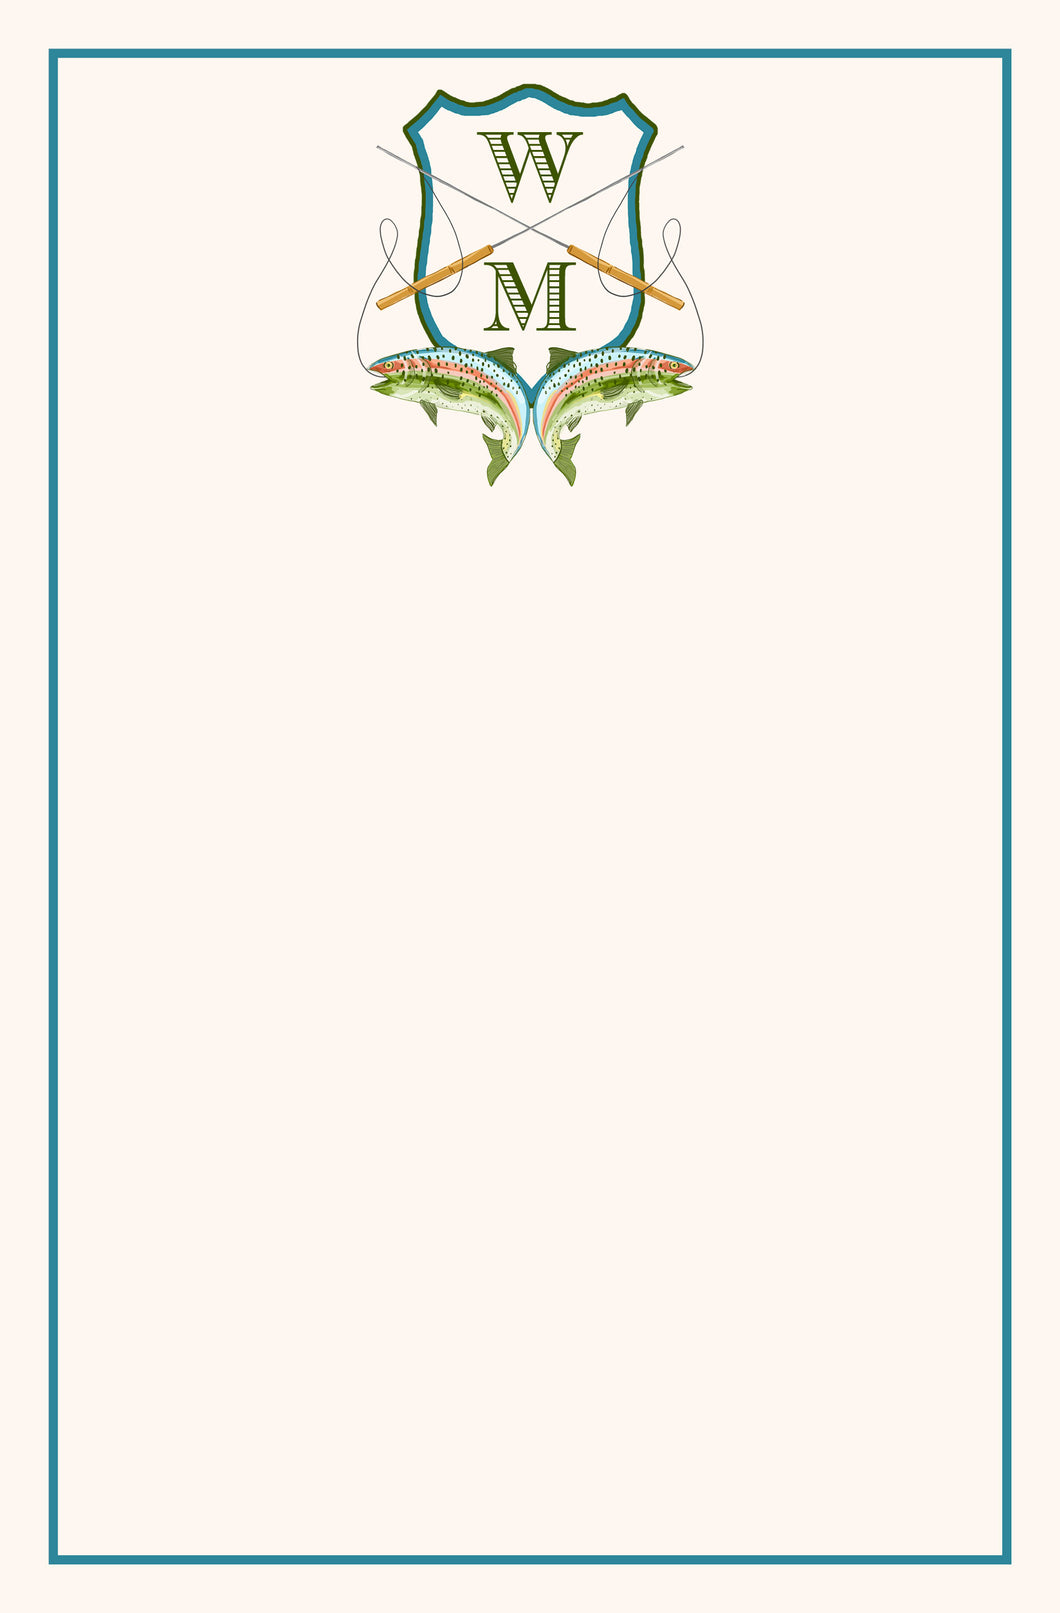 Men's Rainbow Trout Fishing Crest Personalized Notepad, Multiple Sizes Available